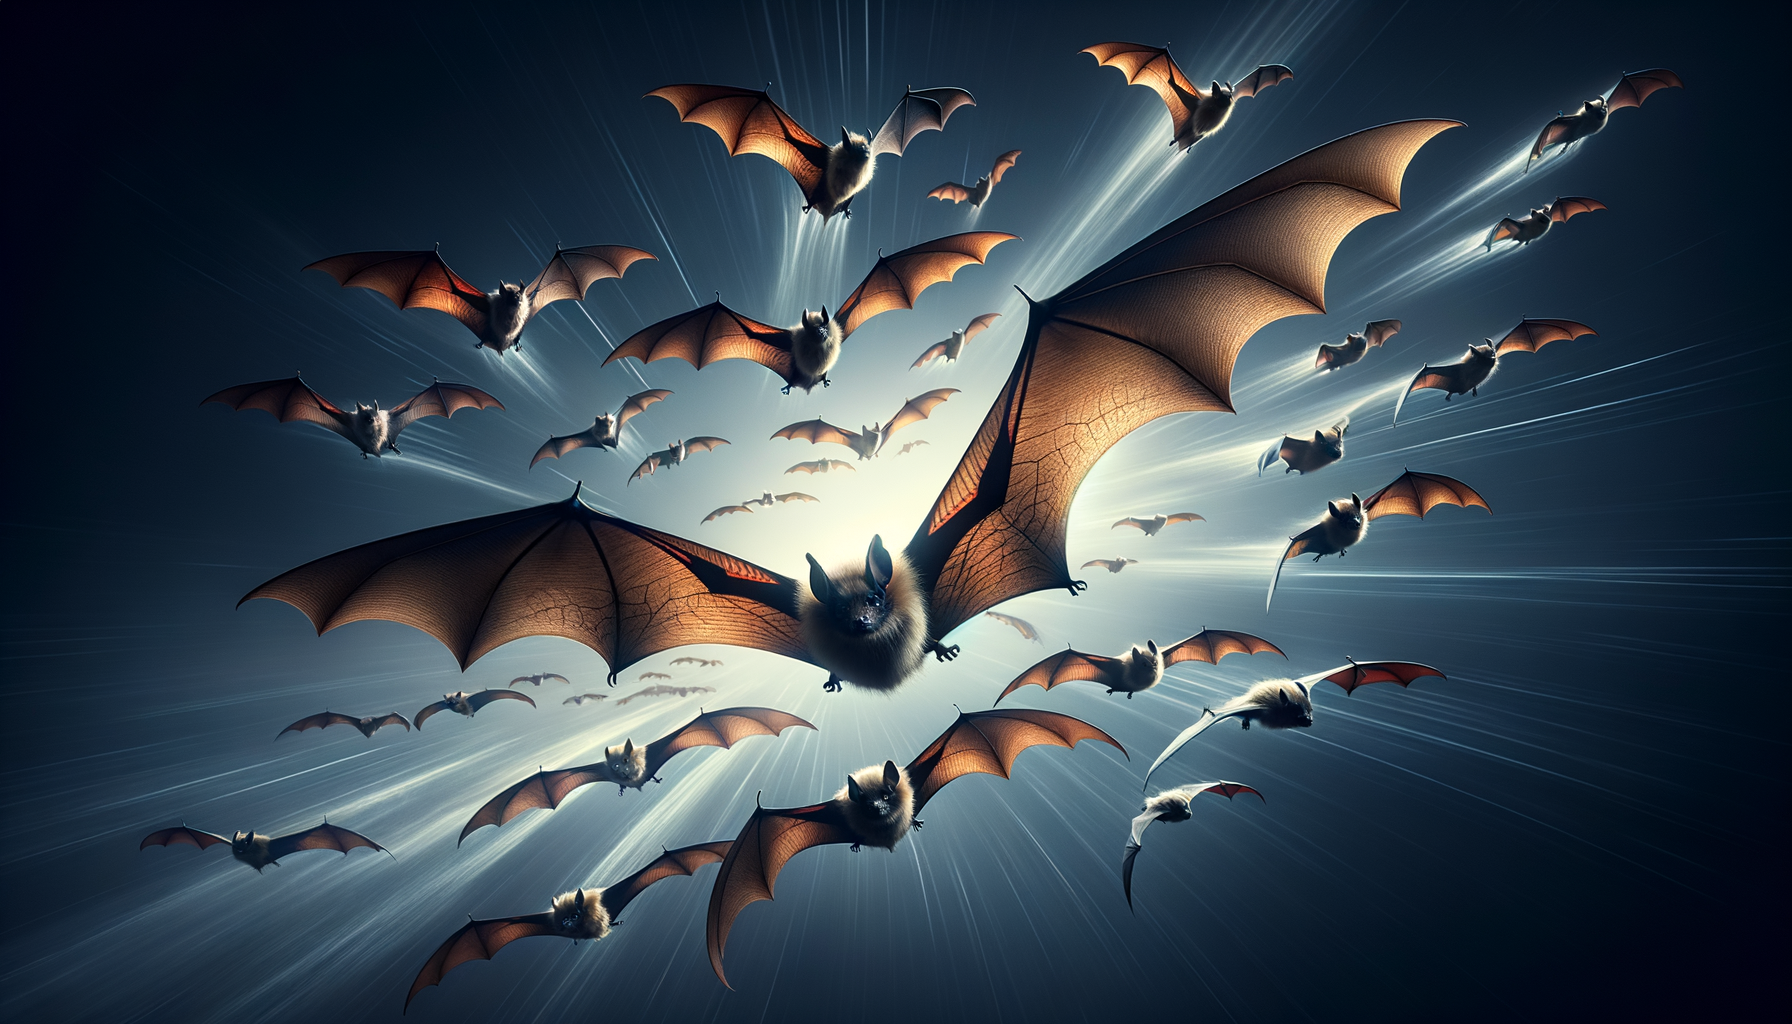 discover the incredible speed and agility of bats as they soar through the sky at 60 miles per hour. learn about these amazing creatures and their impressive flying abilities.